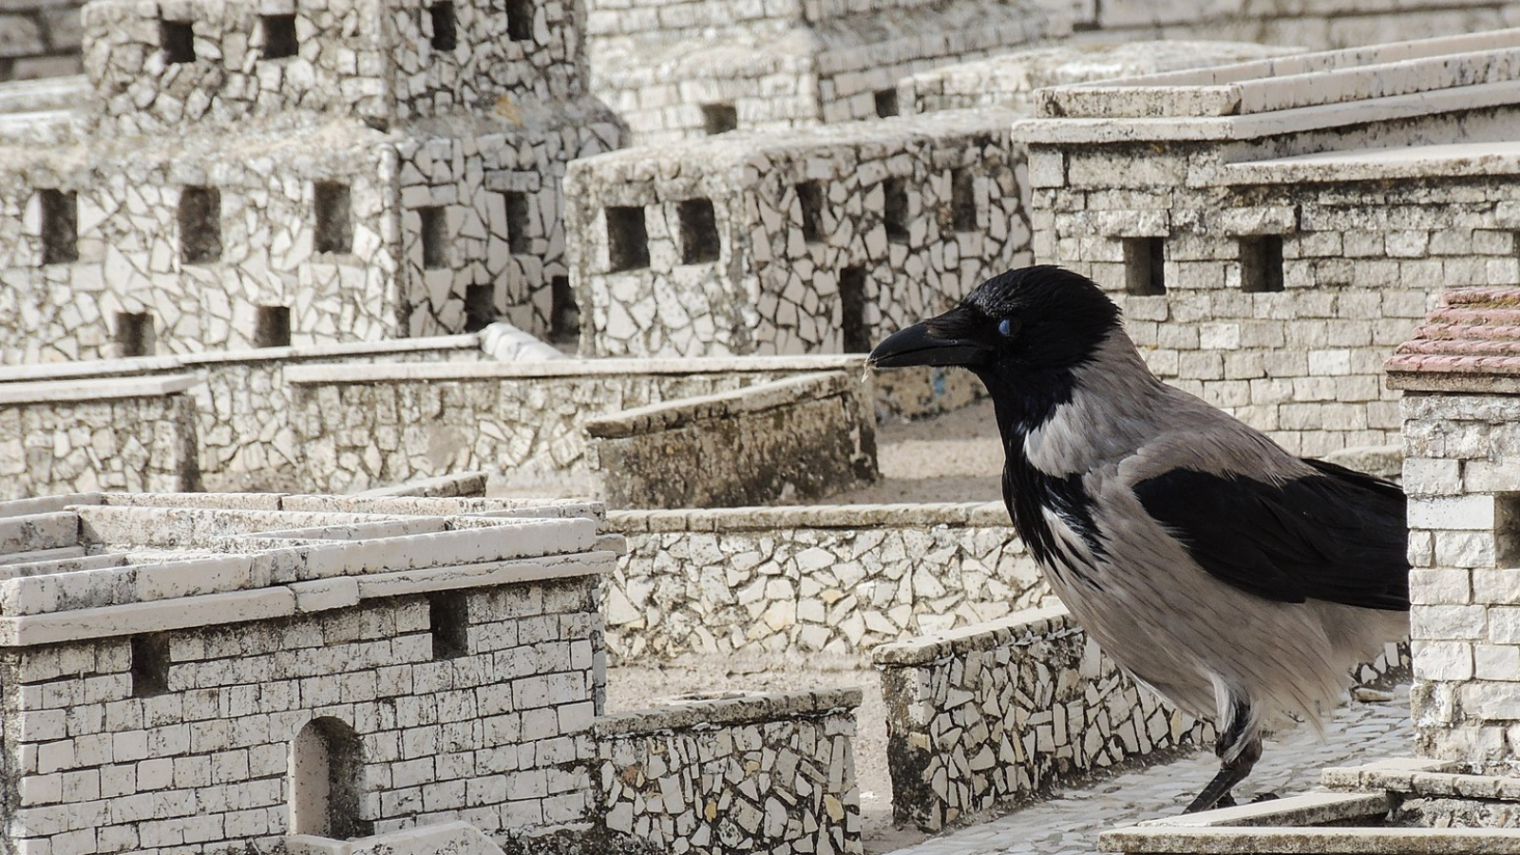 A crow looks like a giant among the miniature models of Jerusalem in the Second Temple Period. Photo by Michael MK Khor via Wikimedia Commons